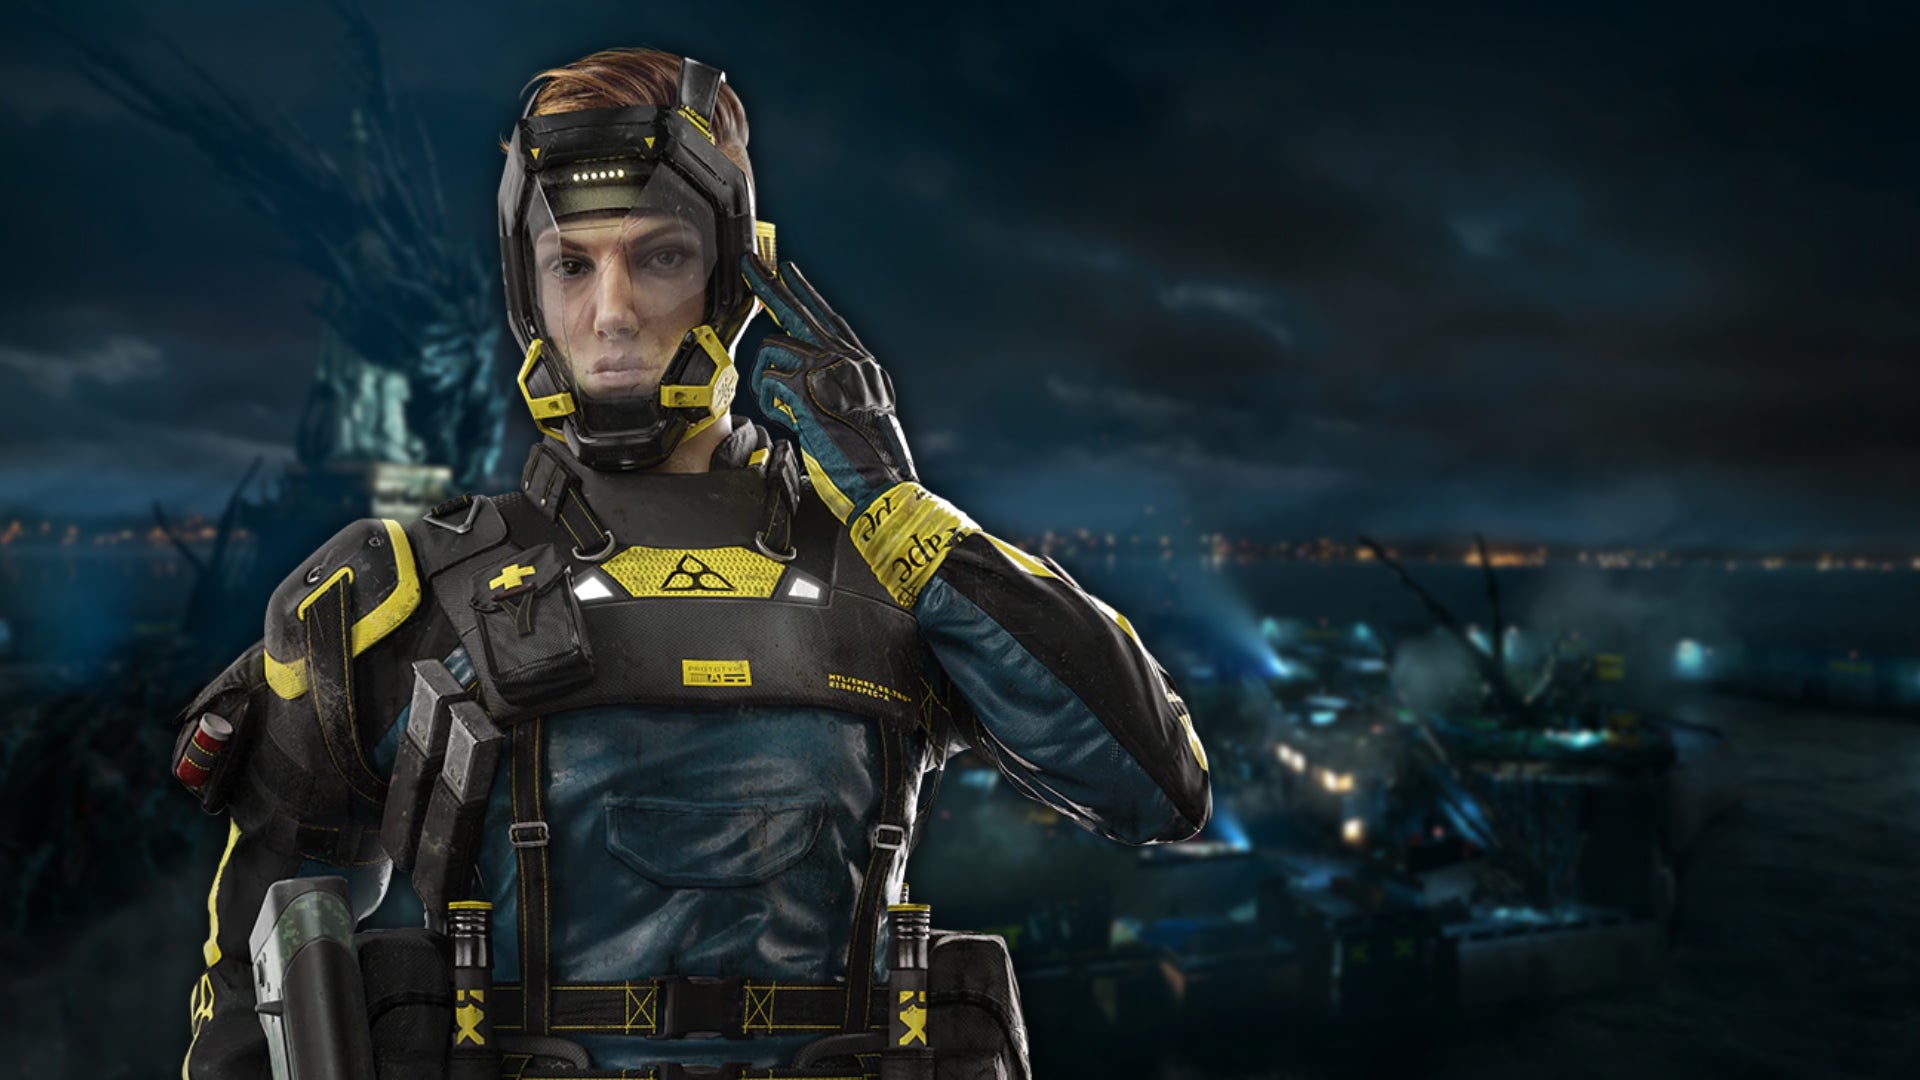 Promotional art of Finka, one of the playable Operators in Rainbow Six Extraction, superimposed on a backdrop of a ruined Liberty Island.